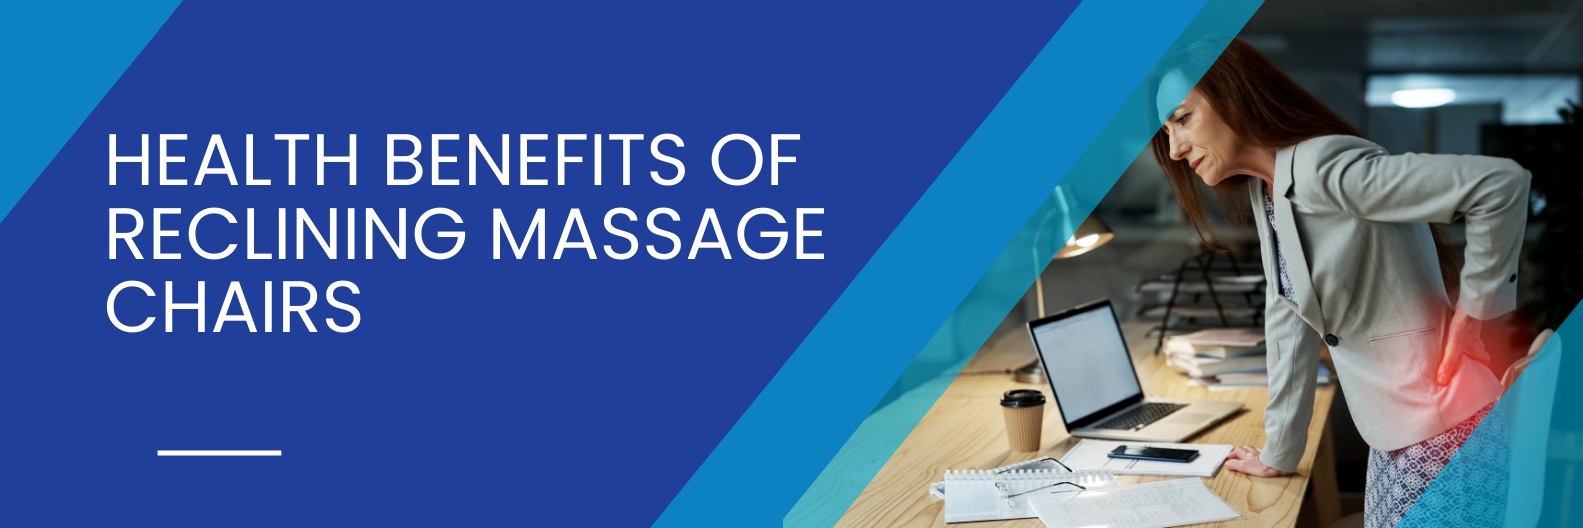 Explore the health benefits of reclining massage chairs. Learn about their positive impact on well-being and how they contribute to optimal health.